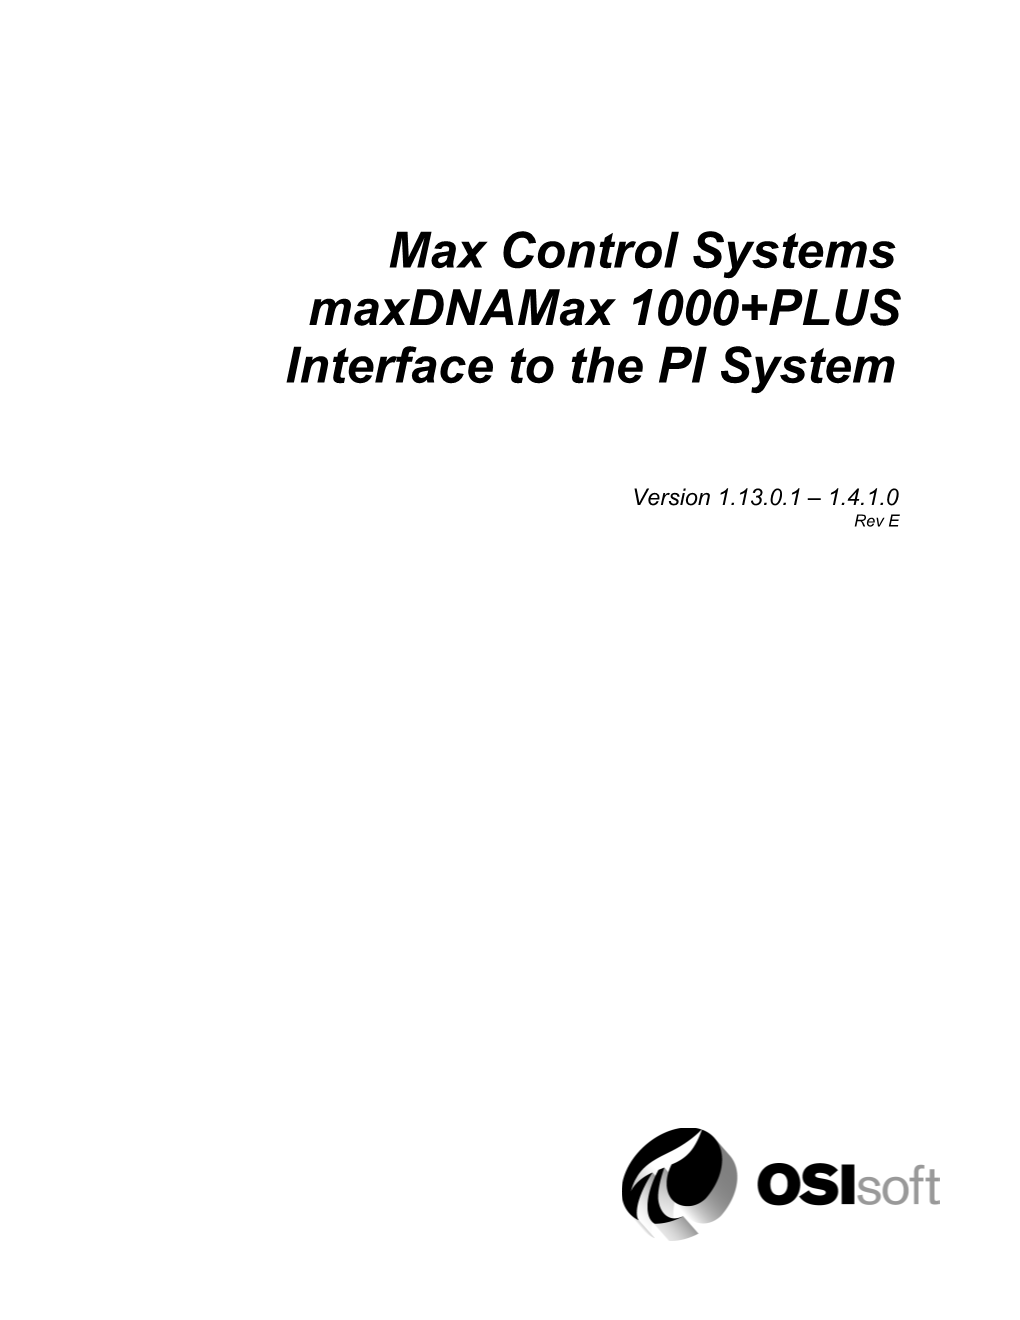 Max Control Systems Maxdna Interface to the PI System